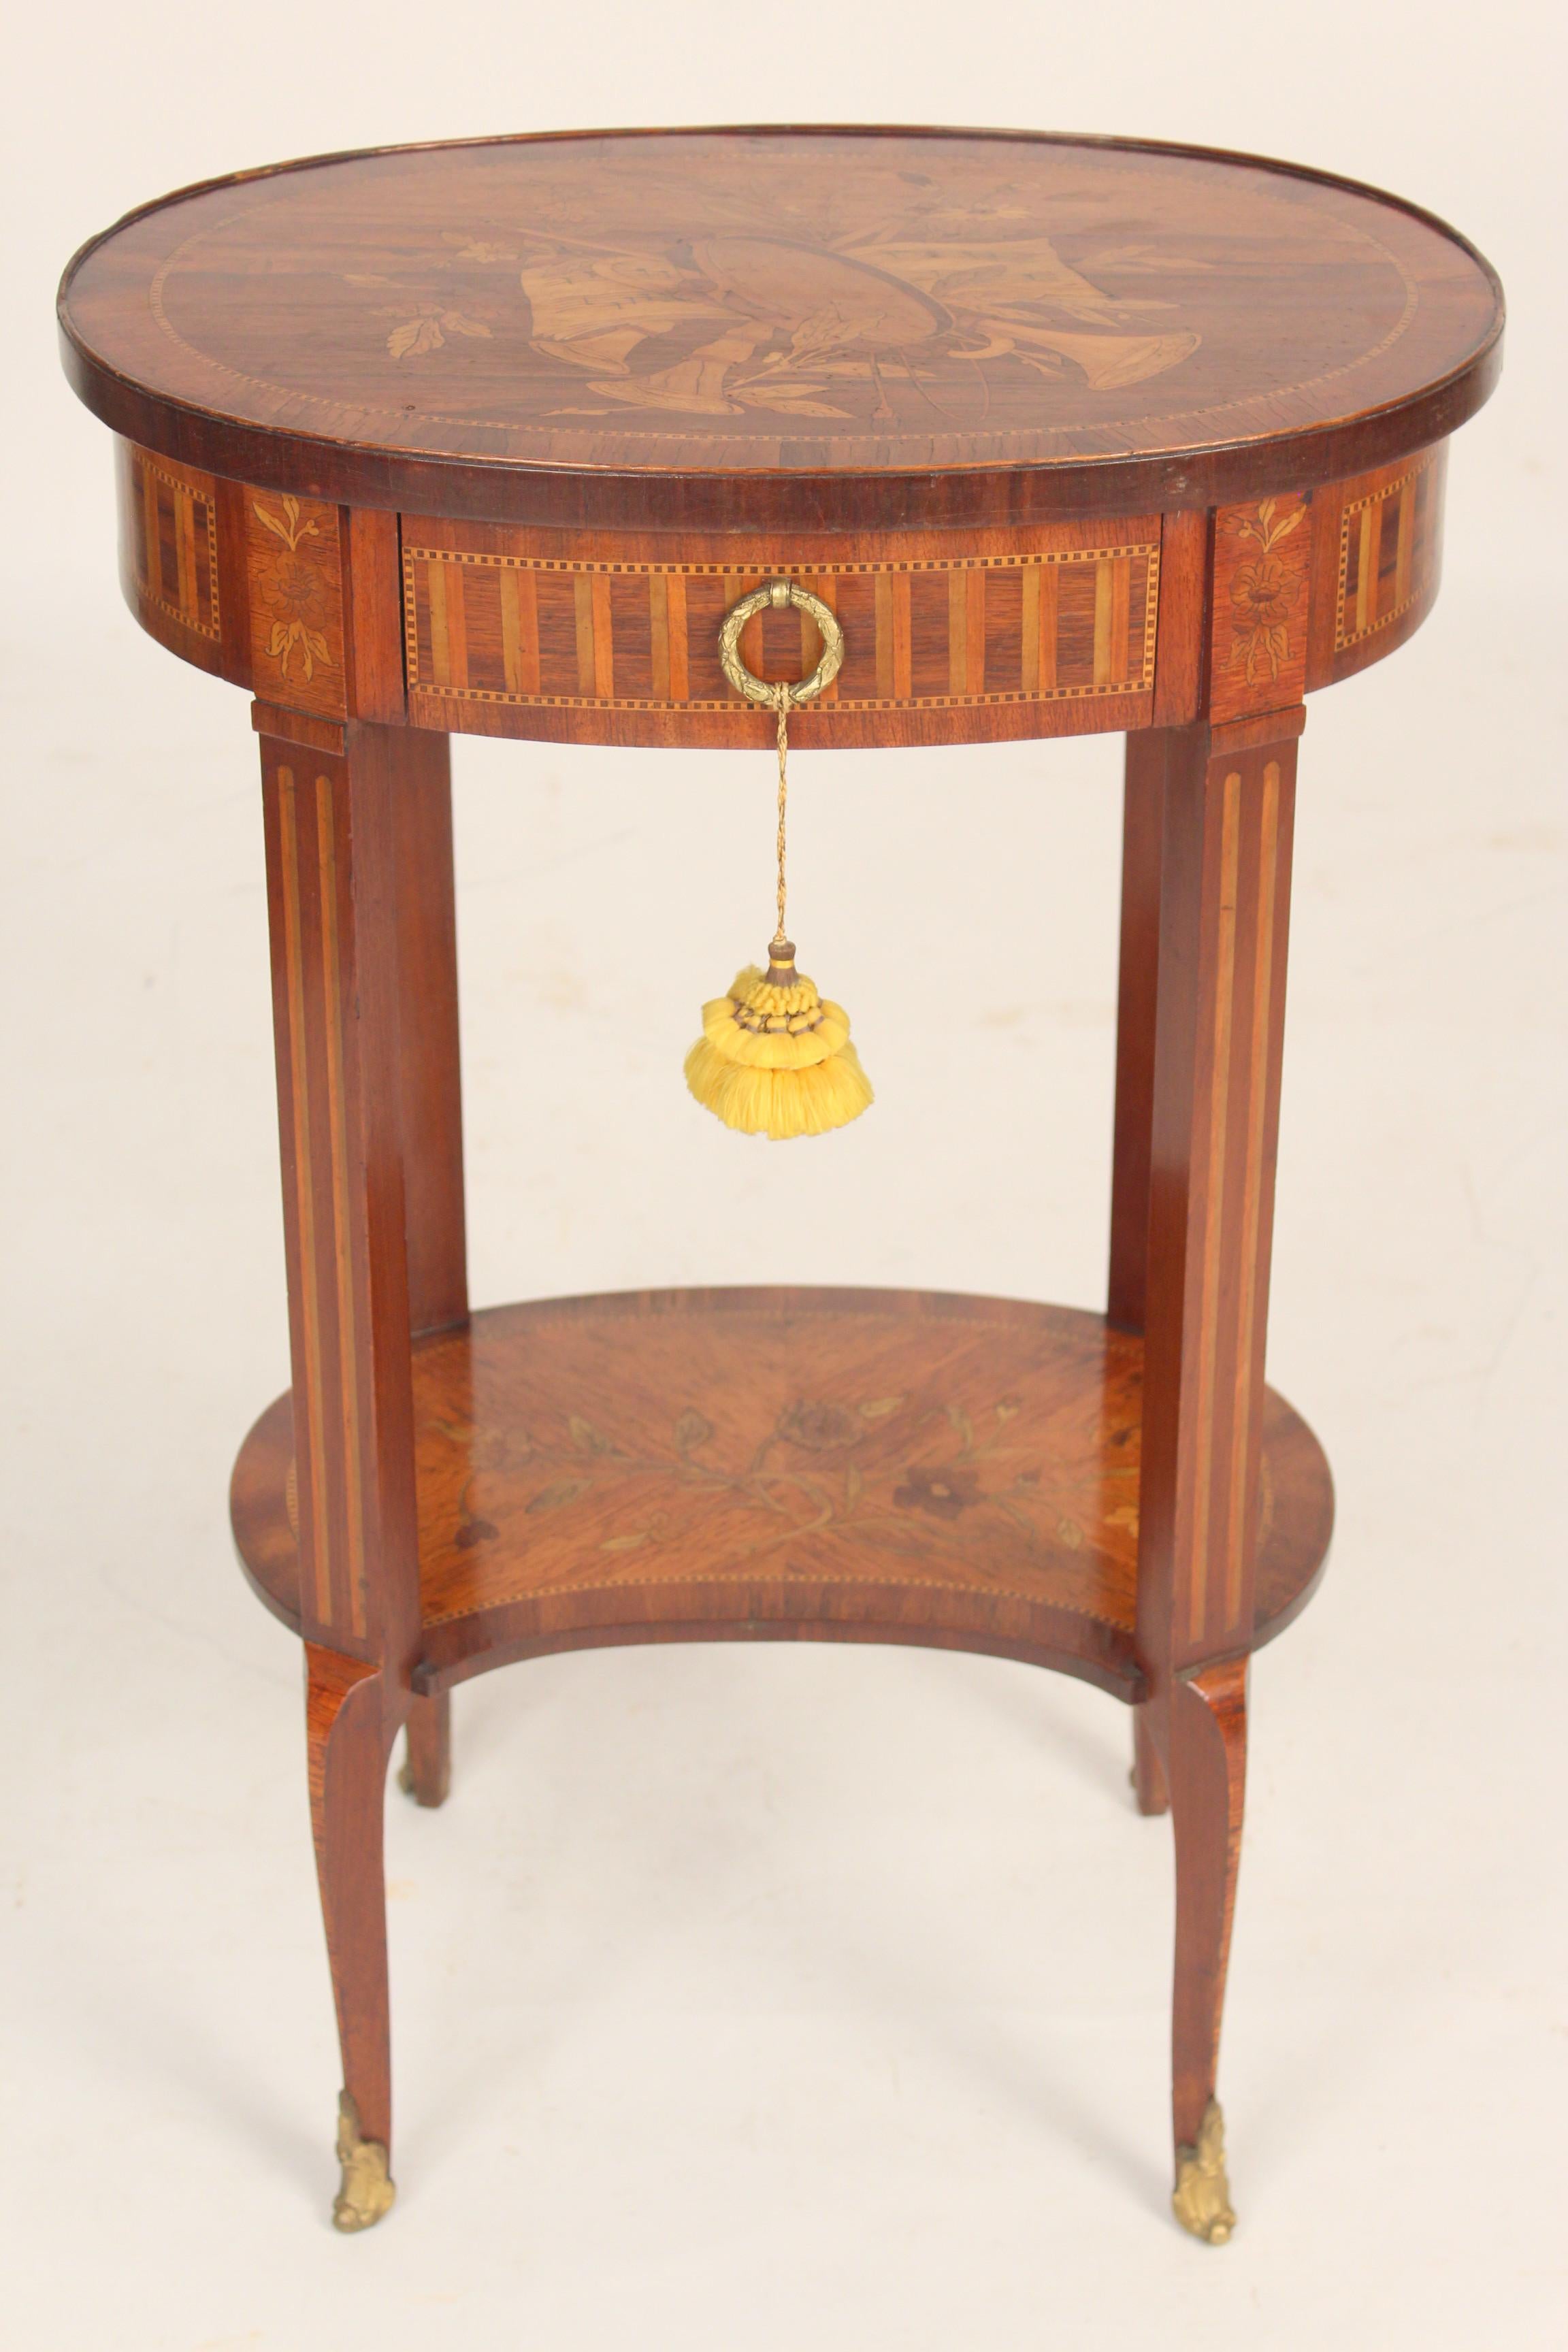 Antique Louis XV style inlaid occasional table with musical trophy inlaid top, circa 1900. Exquisitely inlaid and hand dove tailed drawer construction.